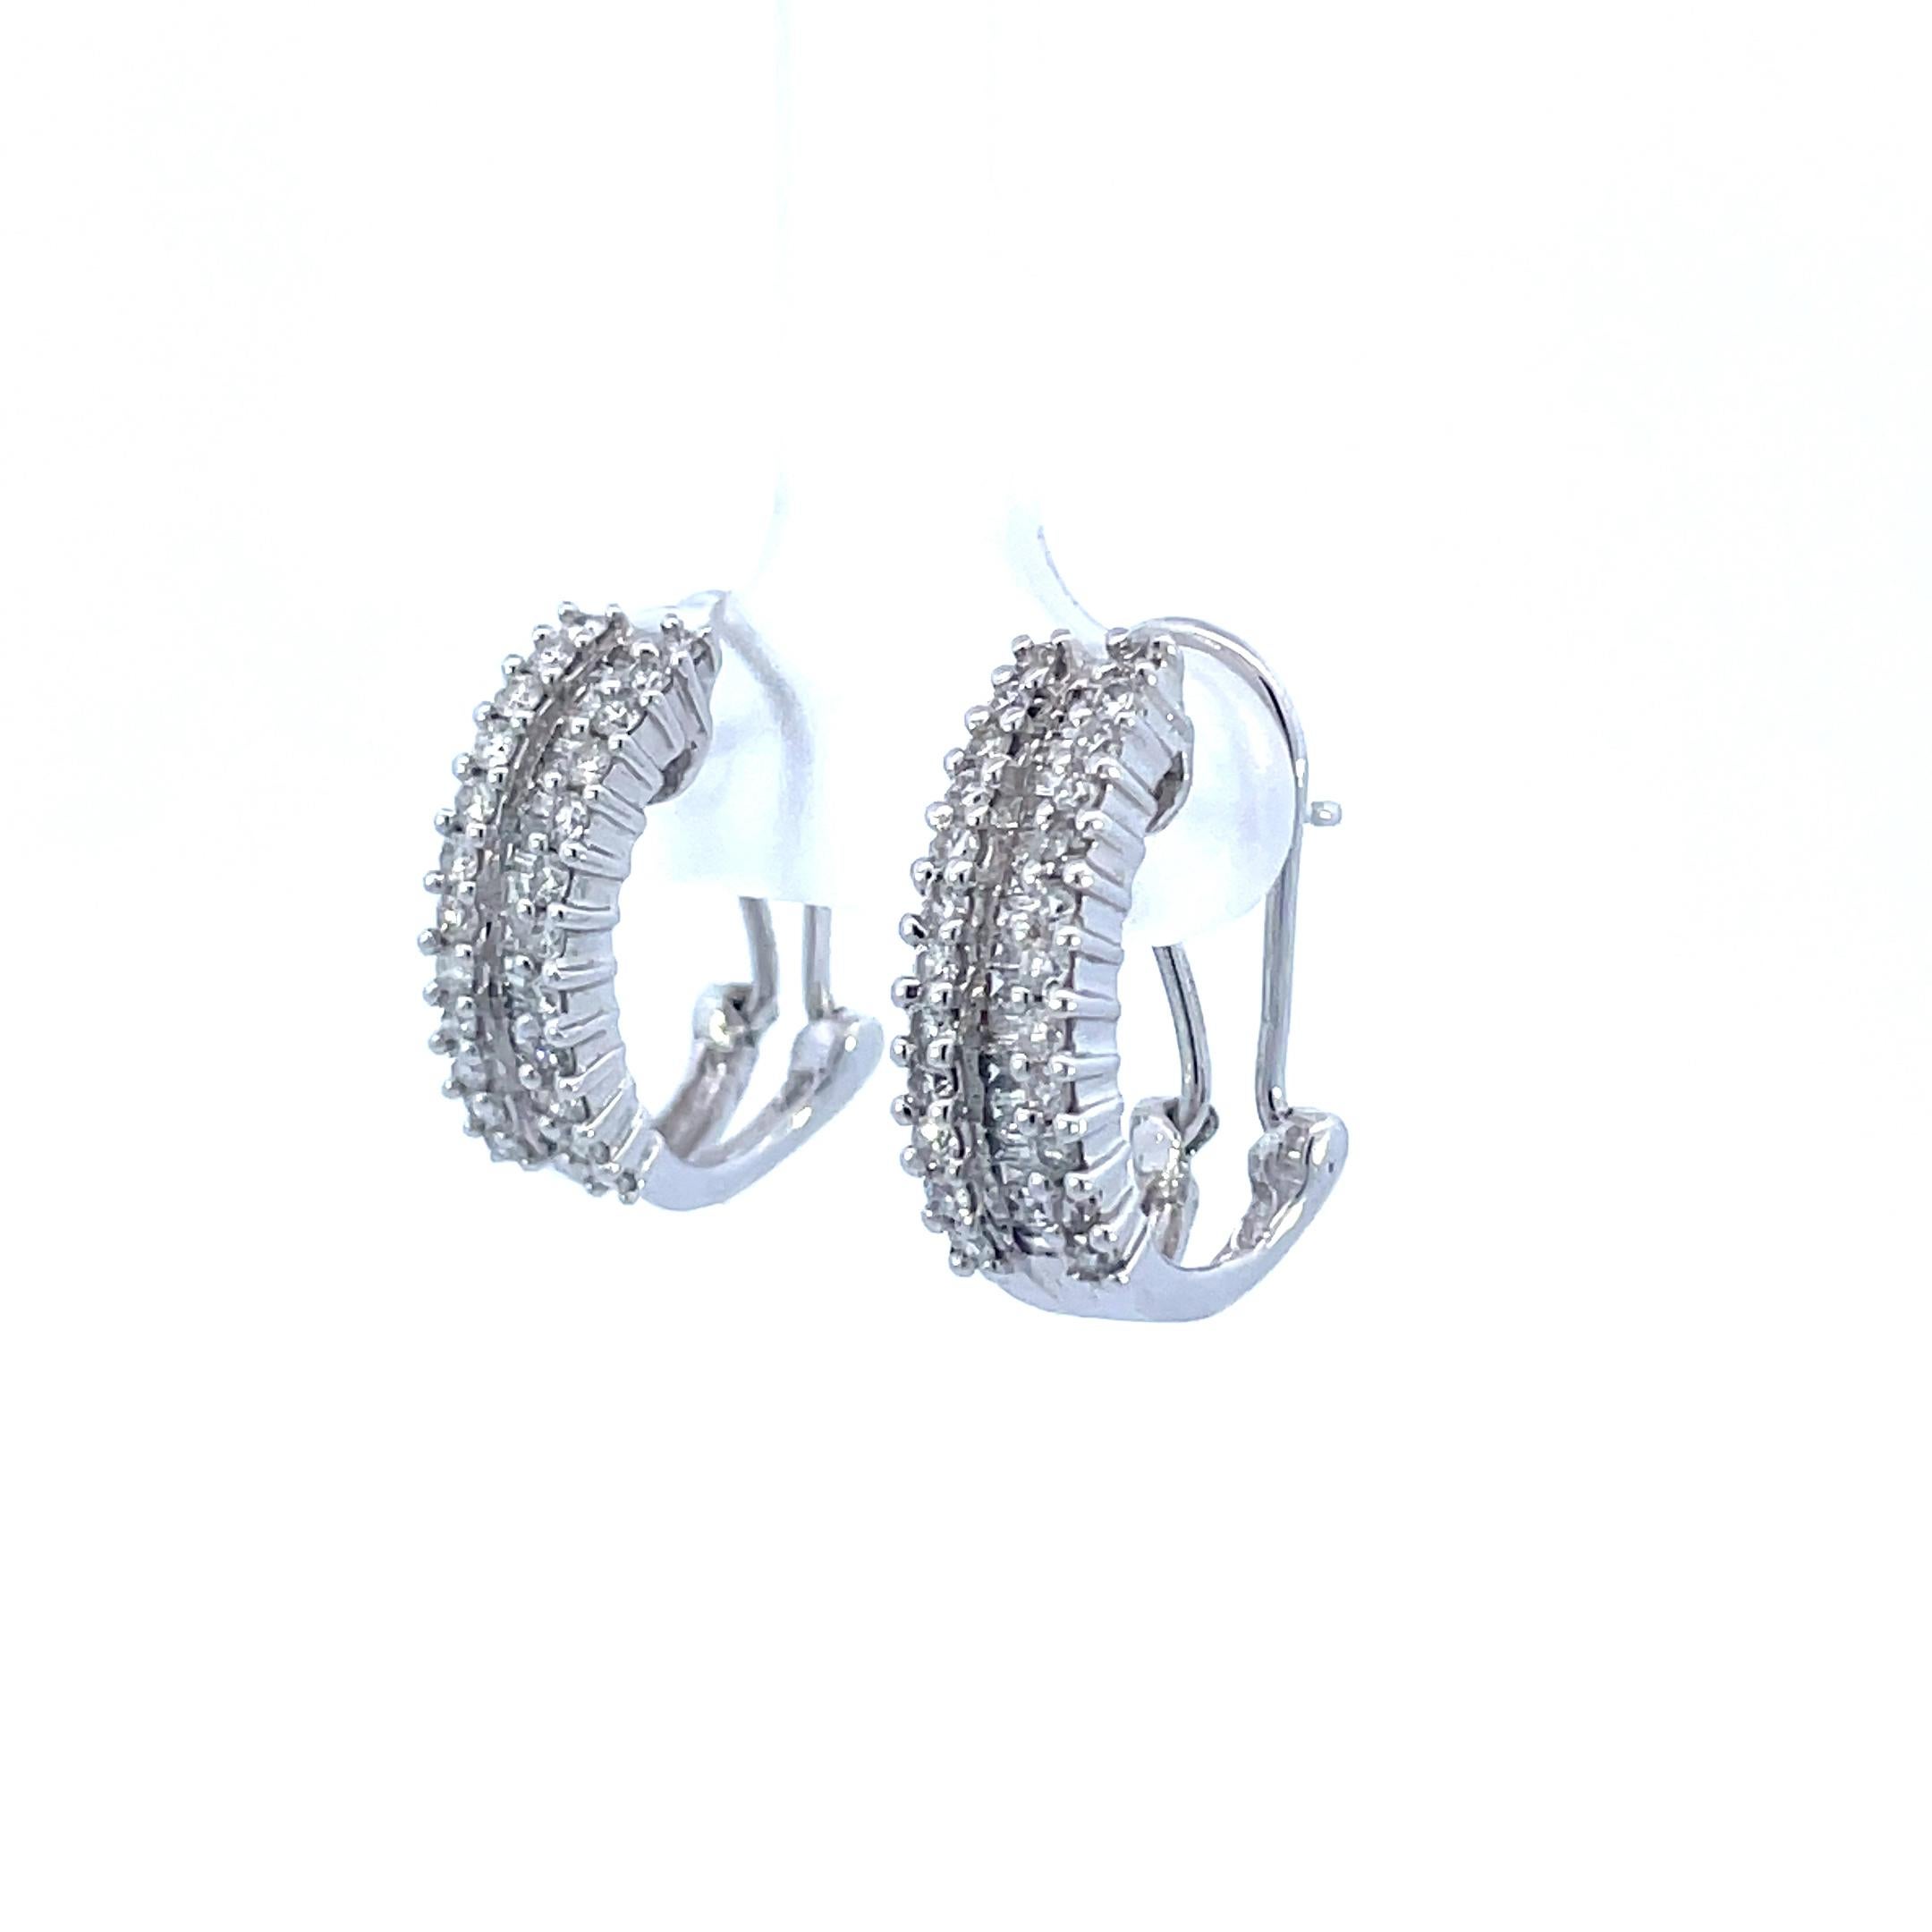 - 14K White Gold 
- 1.00 cttw G color VS2 clarity diamonds 
- Round/baguette cut diamonds 
- Omega Back Post 
- 9.64 grams 

This is a stunning pair of contemporary earrings made in 14k white gold with baguette and round cut diamonds, featuring